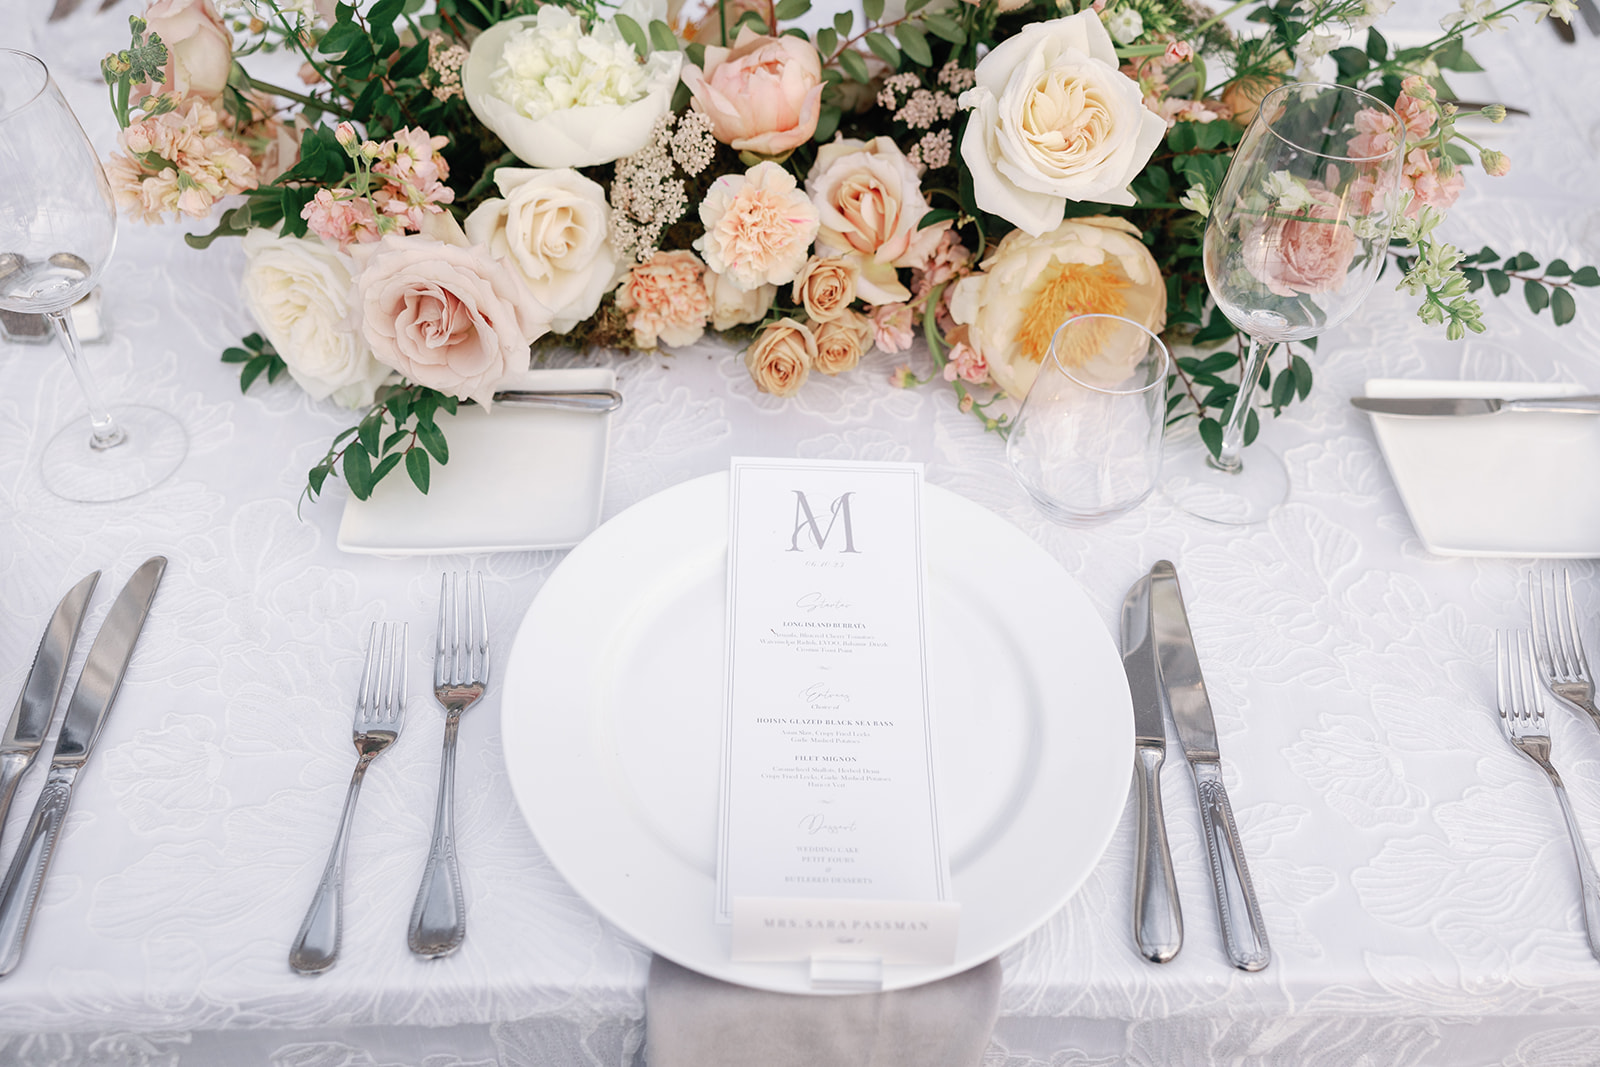 Details of a wedding reception table setting on white embroidered linen with silver silverware